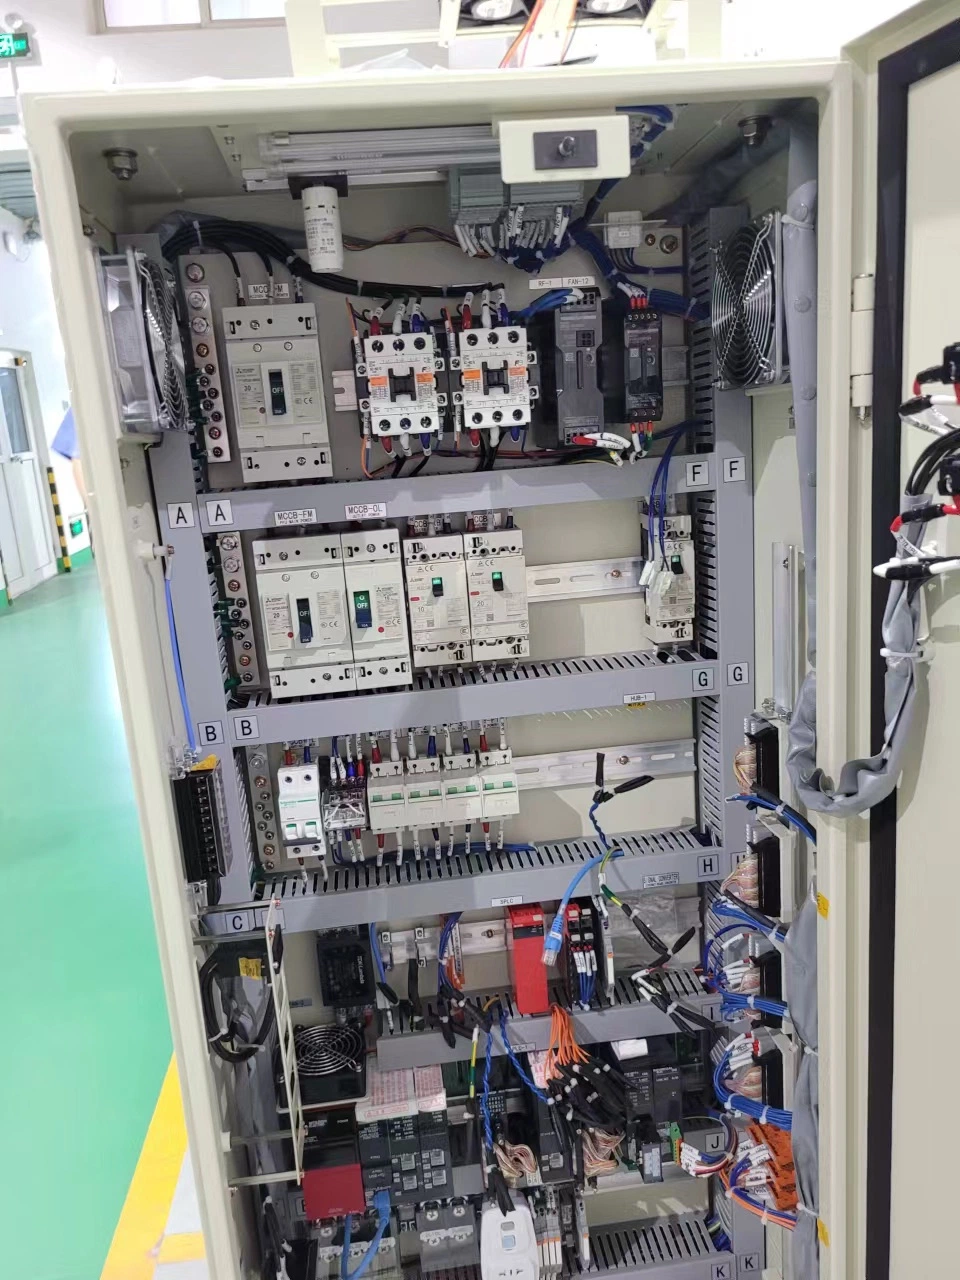 Yy-Q73 Industrial Equipment Internet of Things Control System 220V Electrical Control Cabinet Electric Industrial Panel